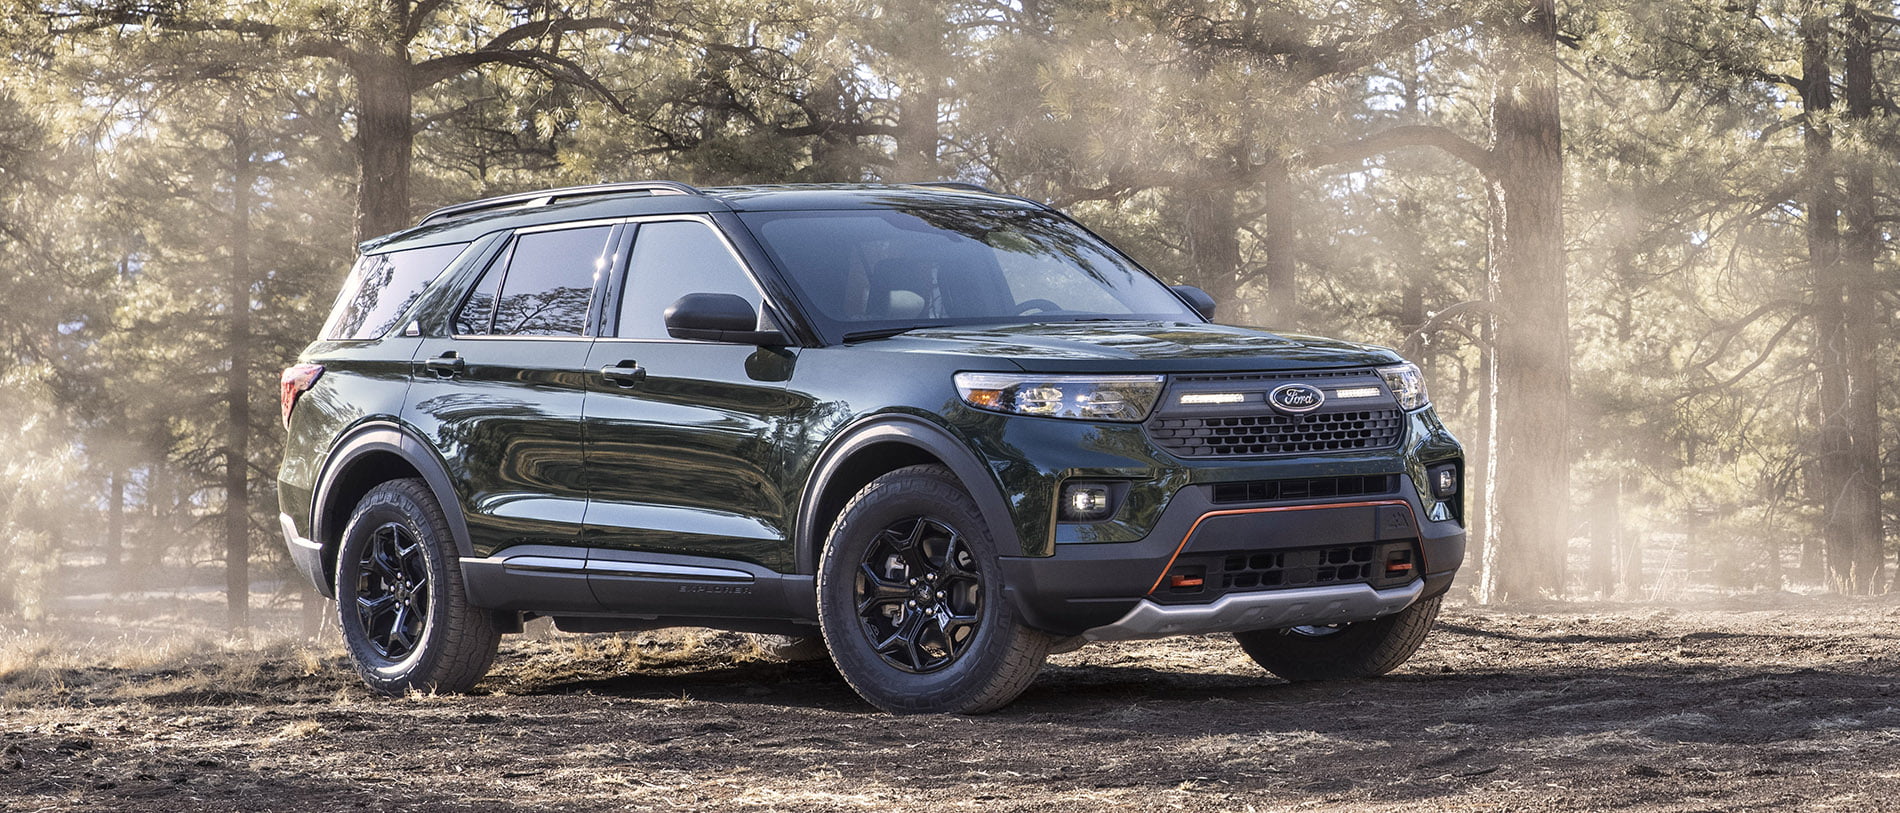 New Rugged Ford Explorer Timberline Announced